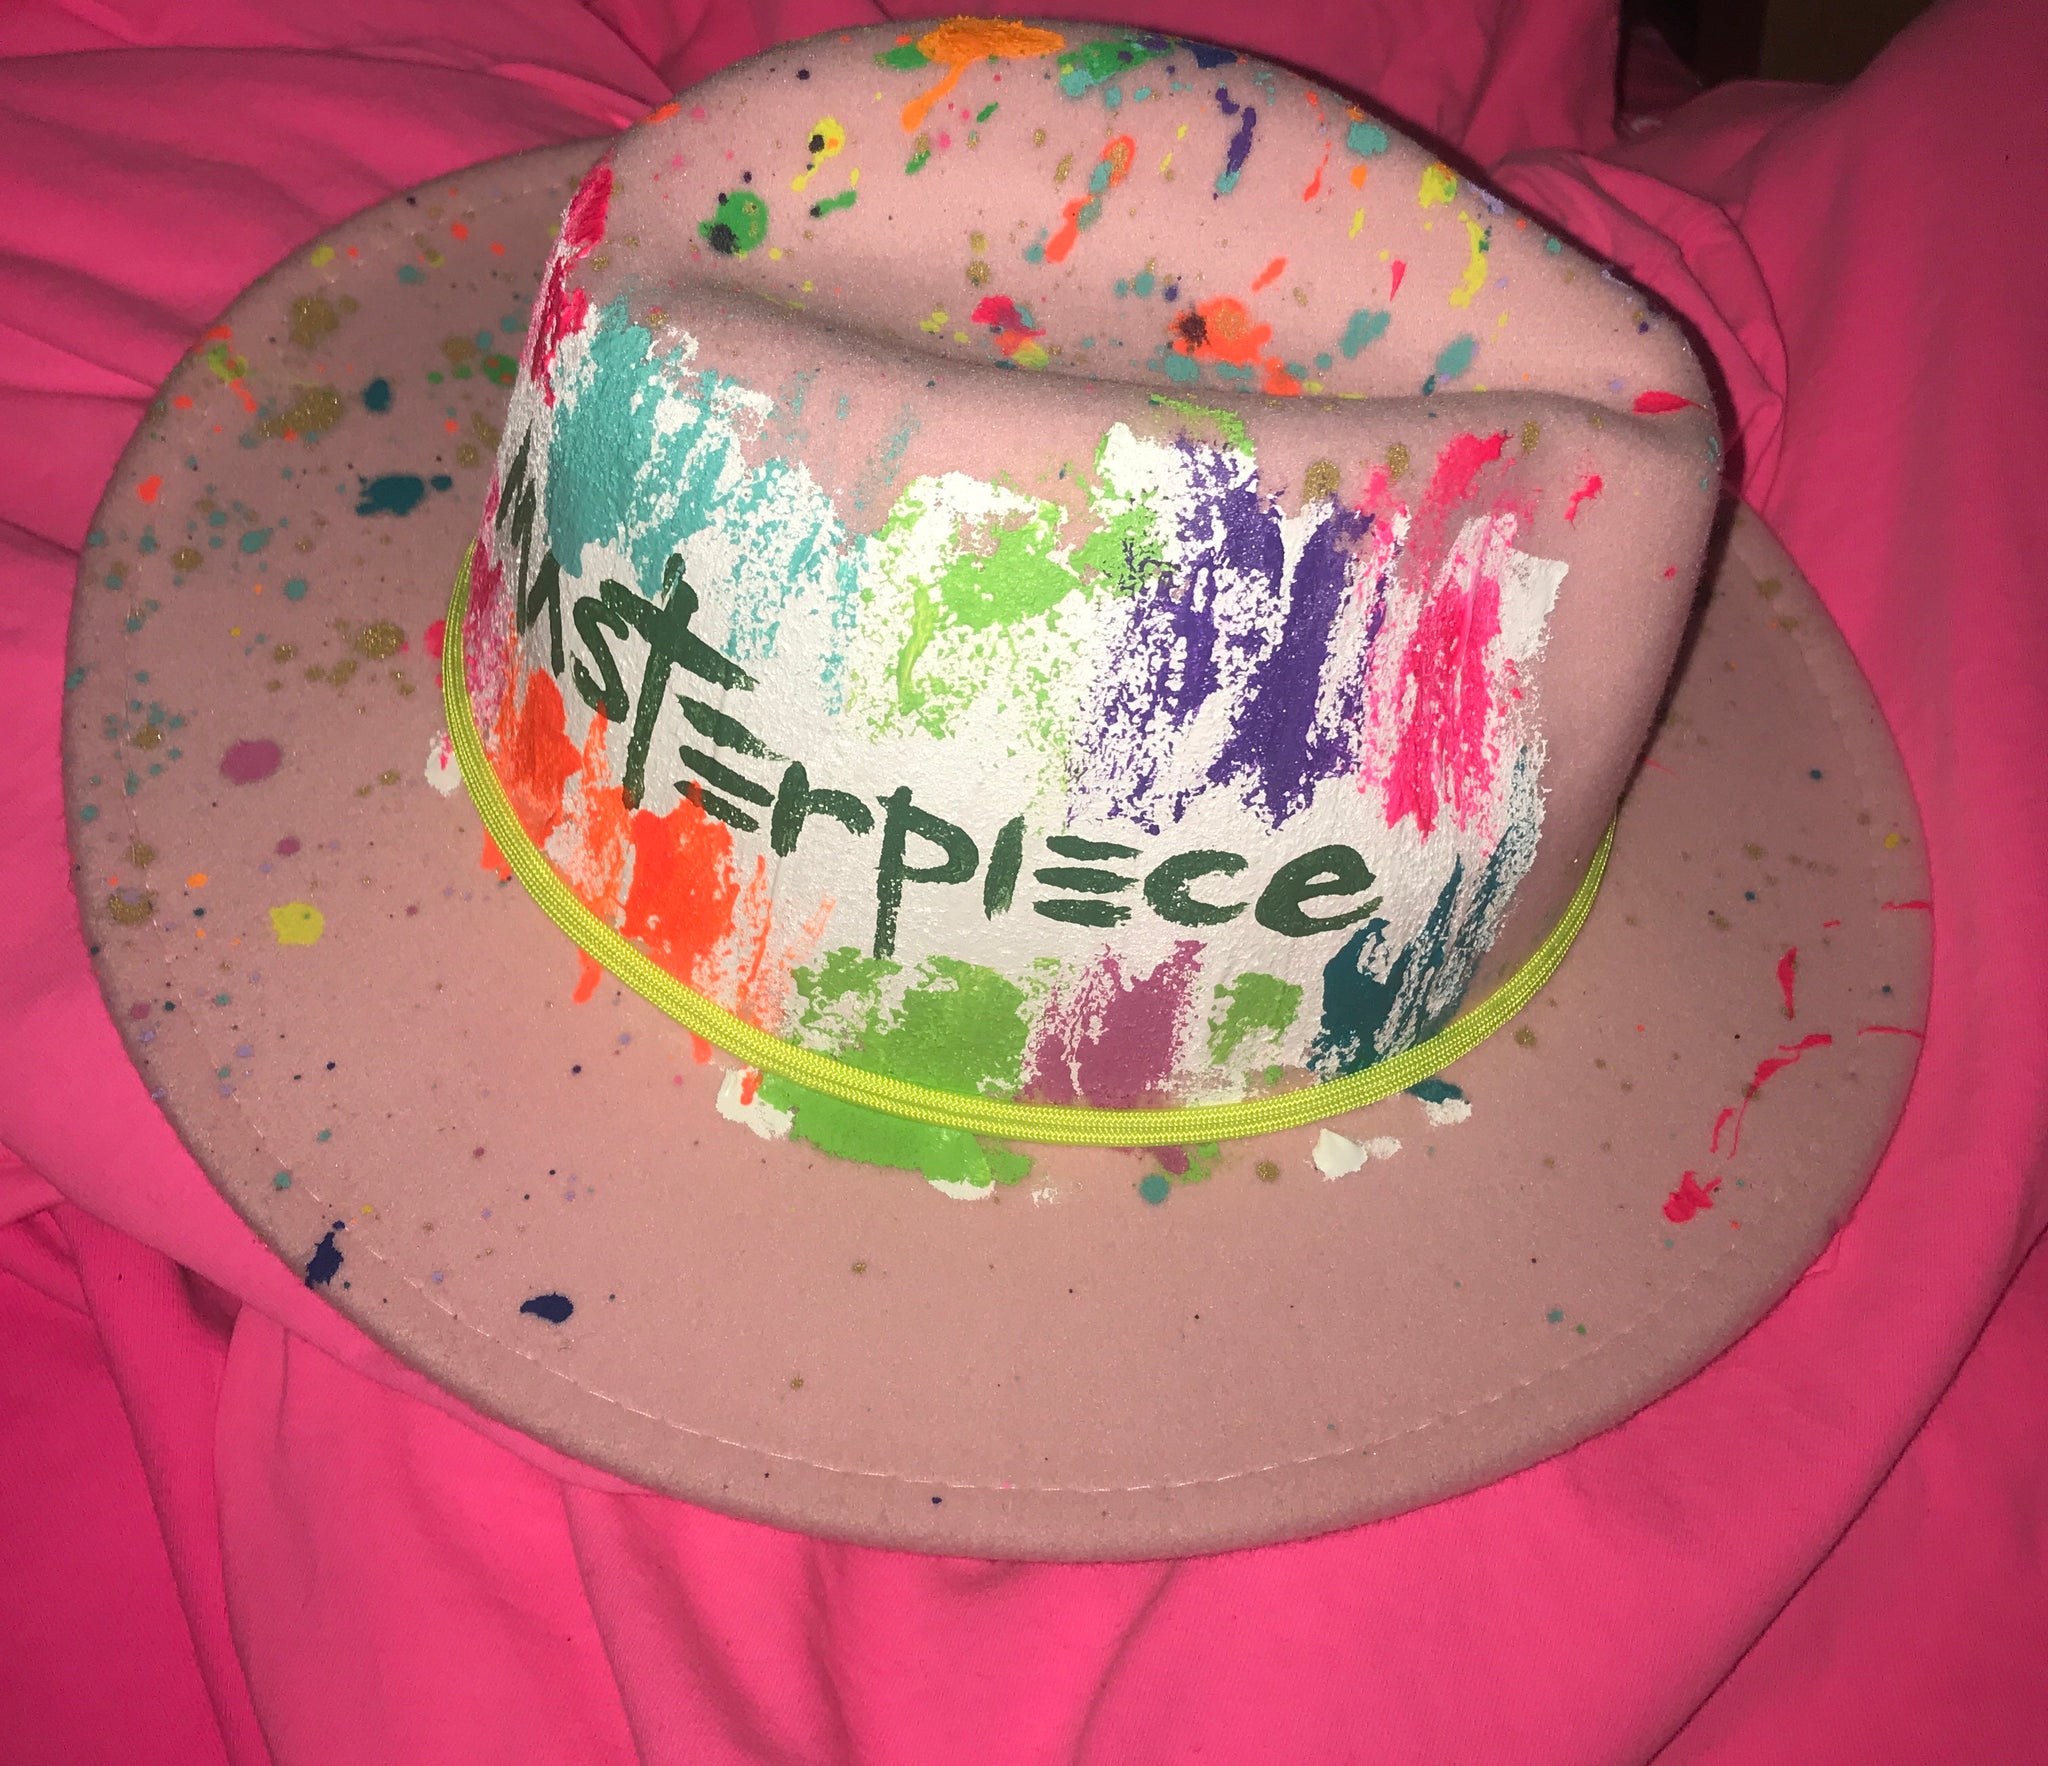 A “MasterPiece” Hand Painted Fedoras